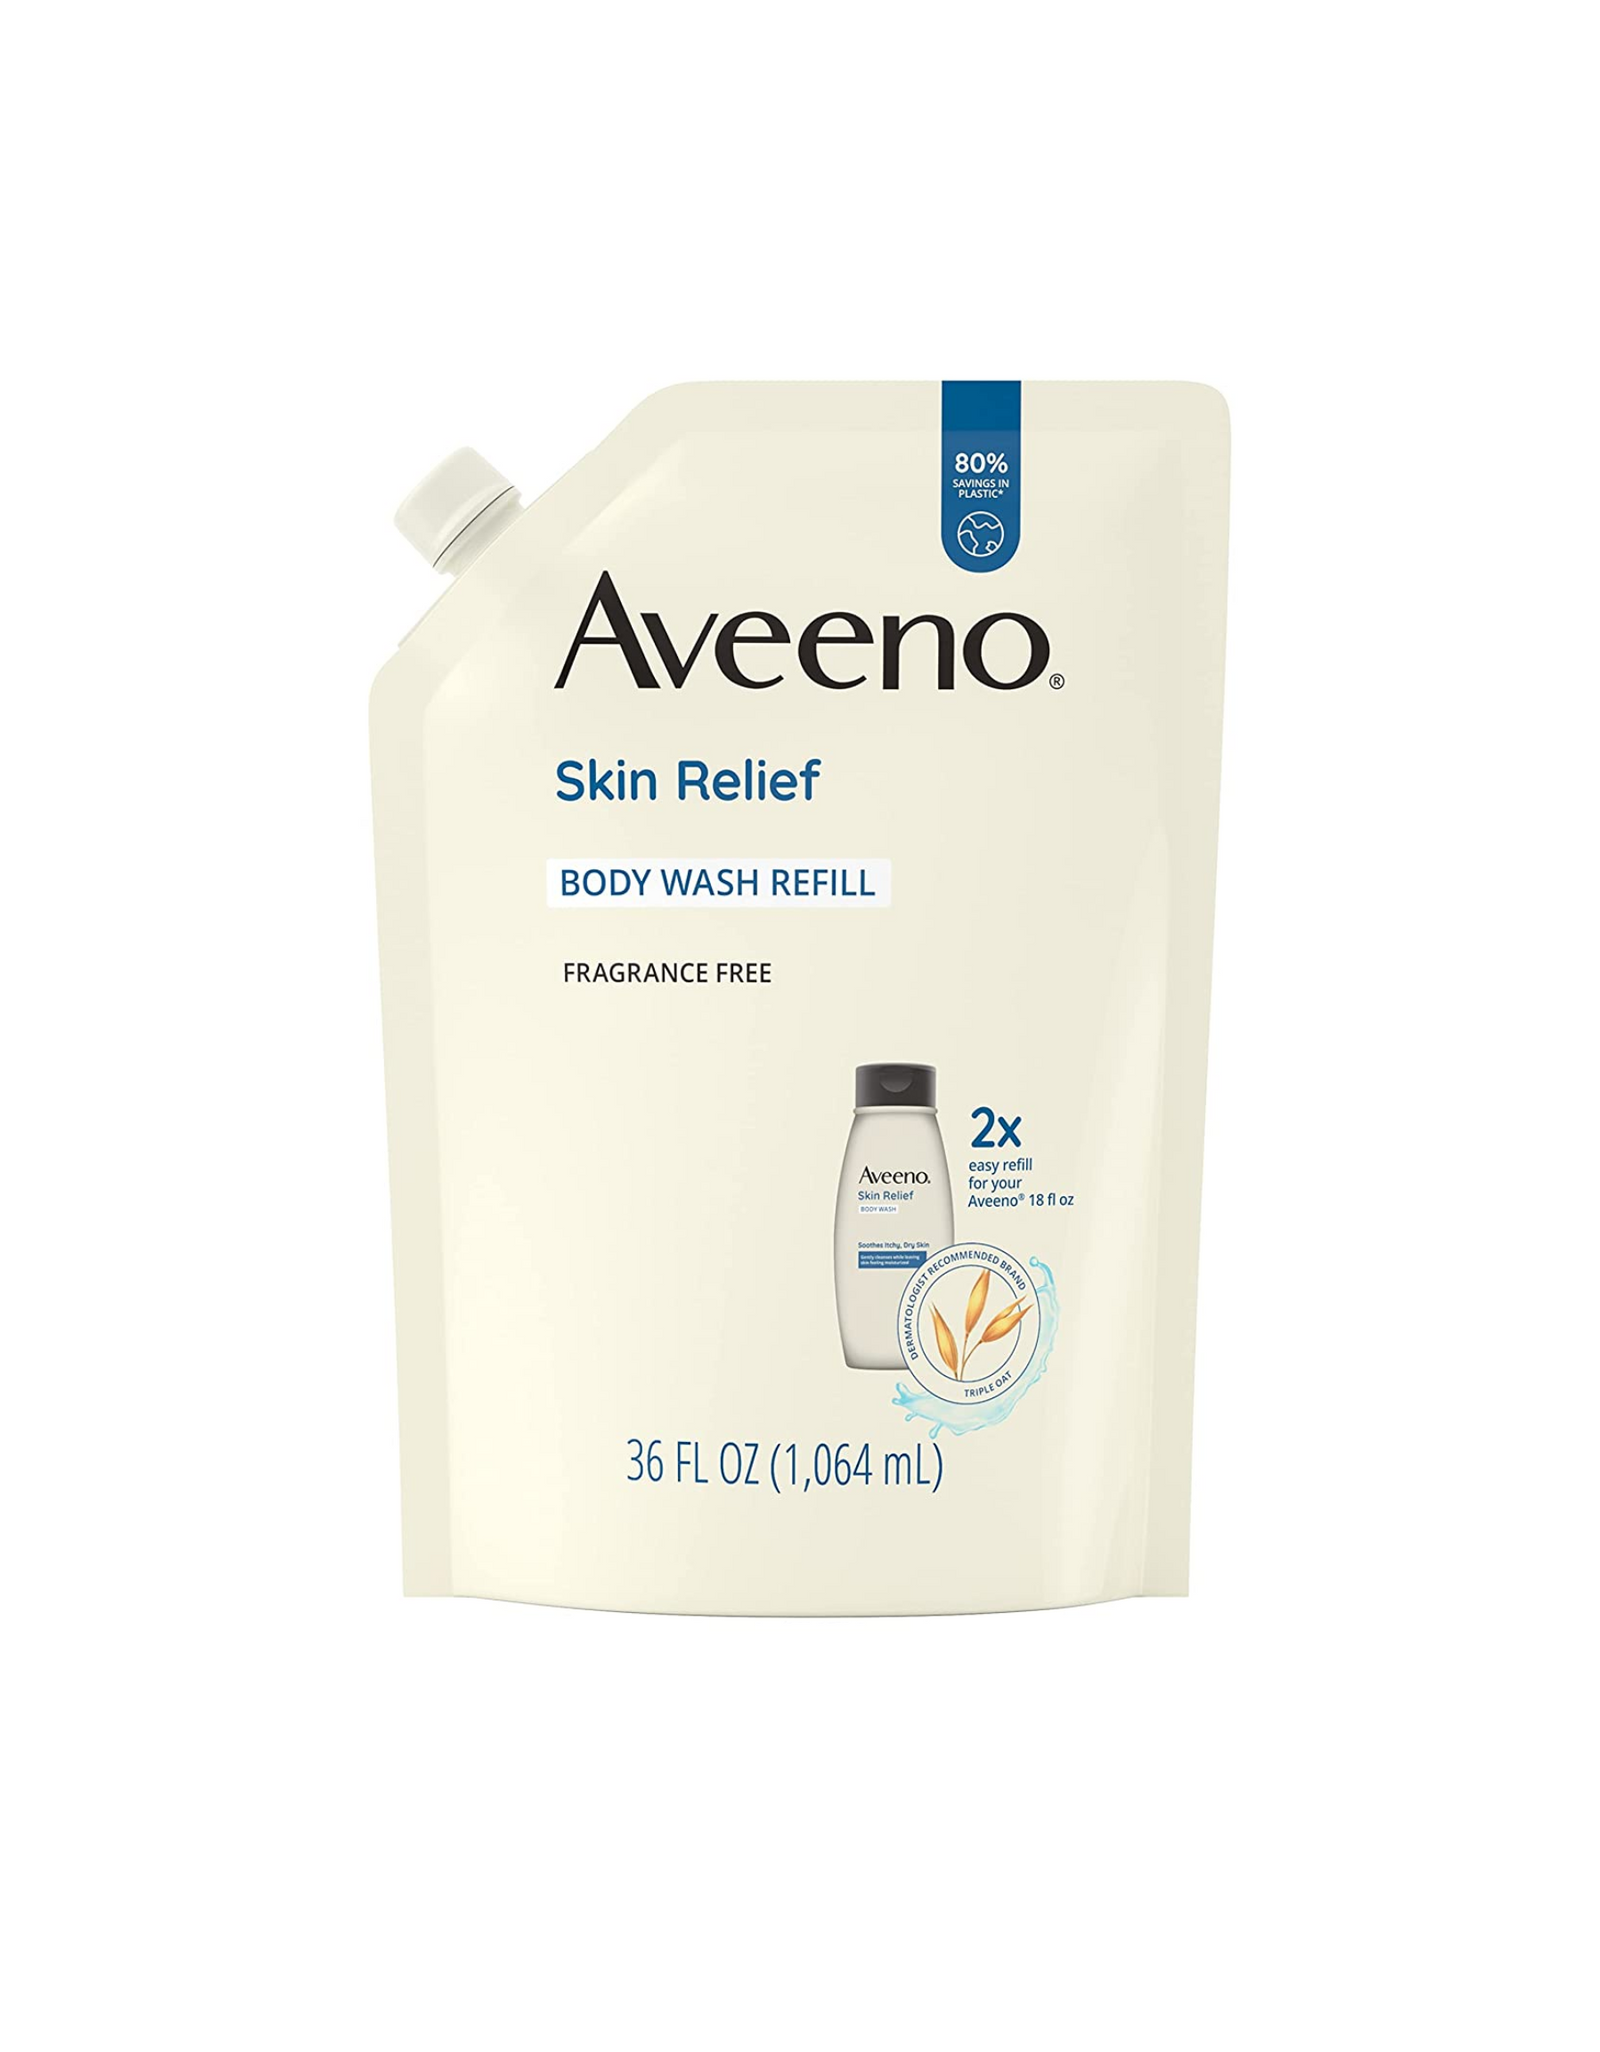 Aveeno Skin Relief Body Wash Refill, Soothe Dry Itchy Skin, 36 fl oz